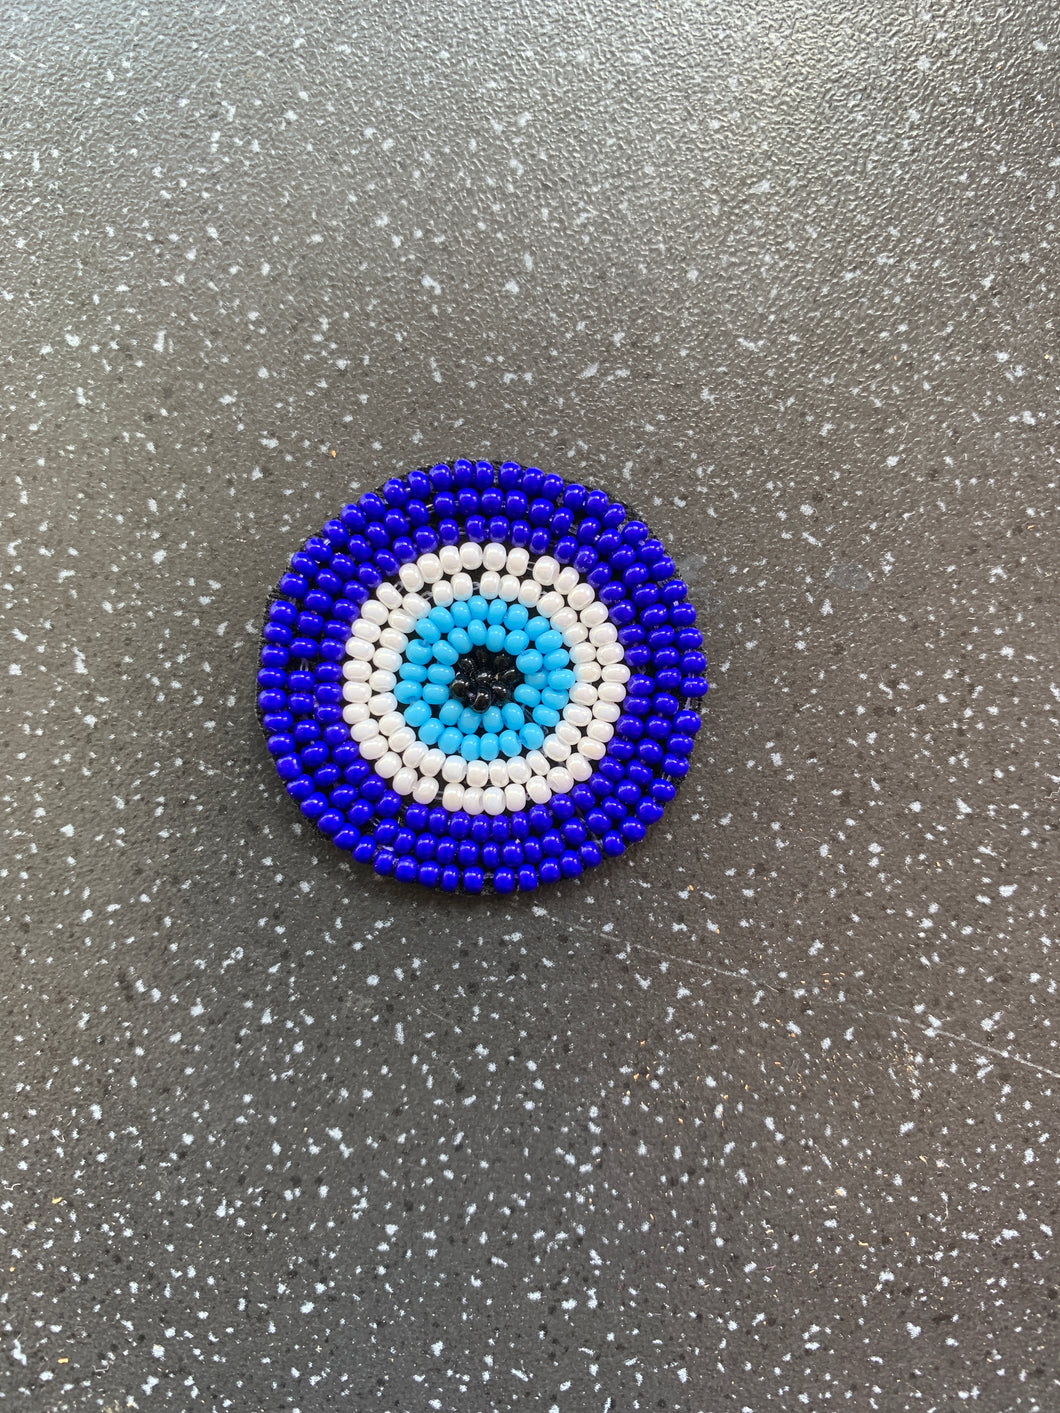 Blockage Remover & Protection: Evil Eye, Black Magic, Hexes, Curses, Spells, Voodoo Protection (6 in 1) Beaded Piece for Removing Bad Energies / Blockages